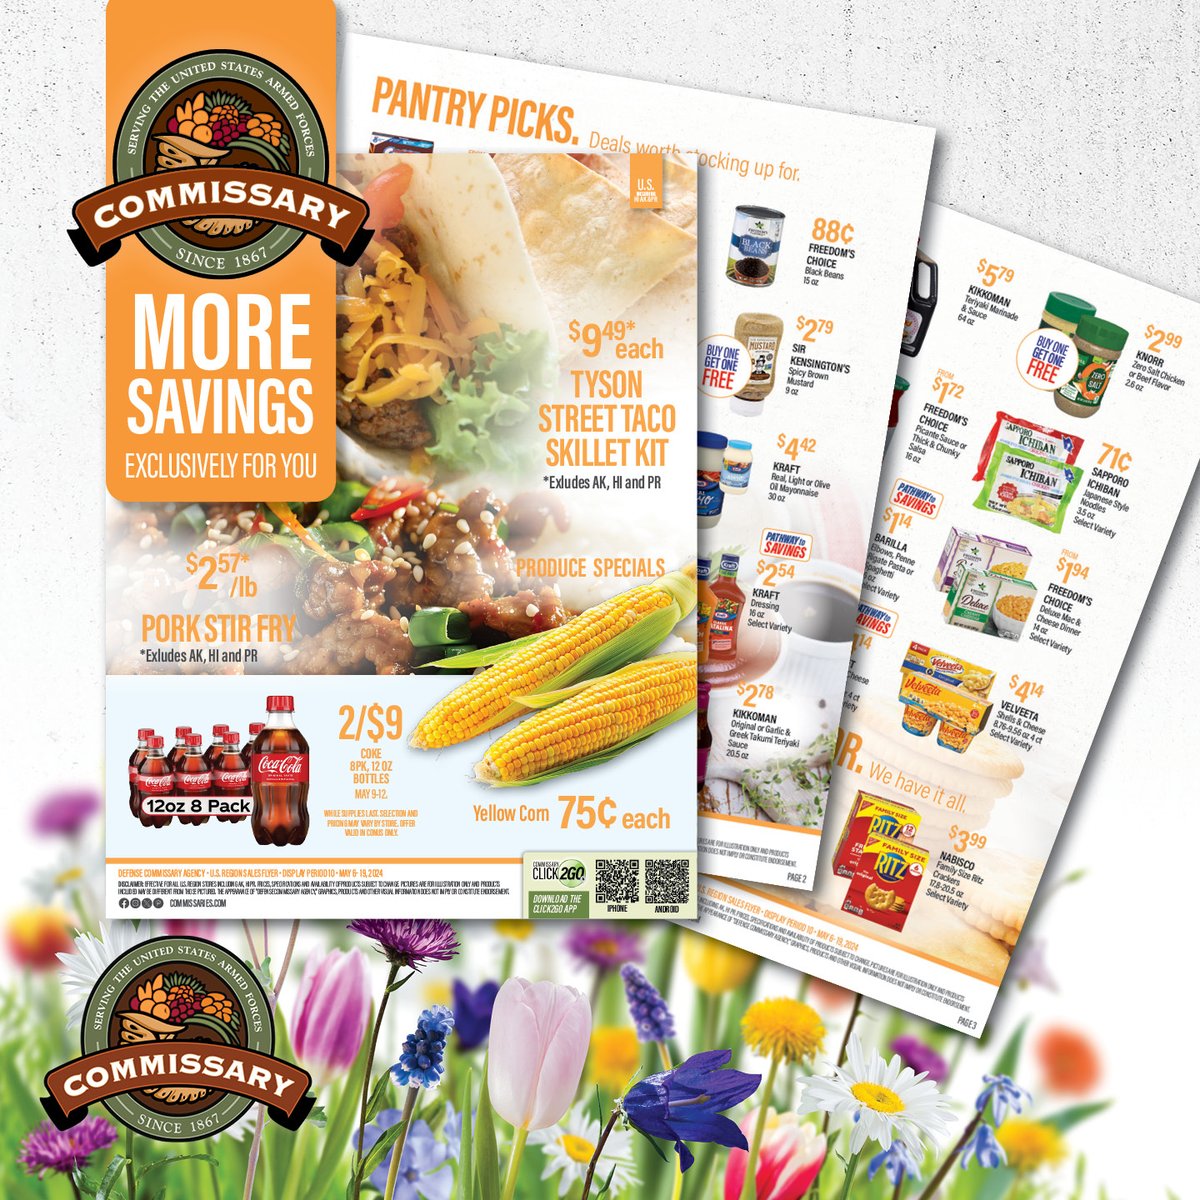 Stock your pantry with irresistible deals in the Commissary Sales Flyer for May 6-19: corp.commissaries.com/our-agency/new…

#commissarysavings #milfam #milso